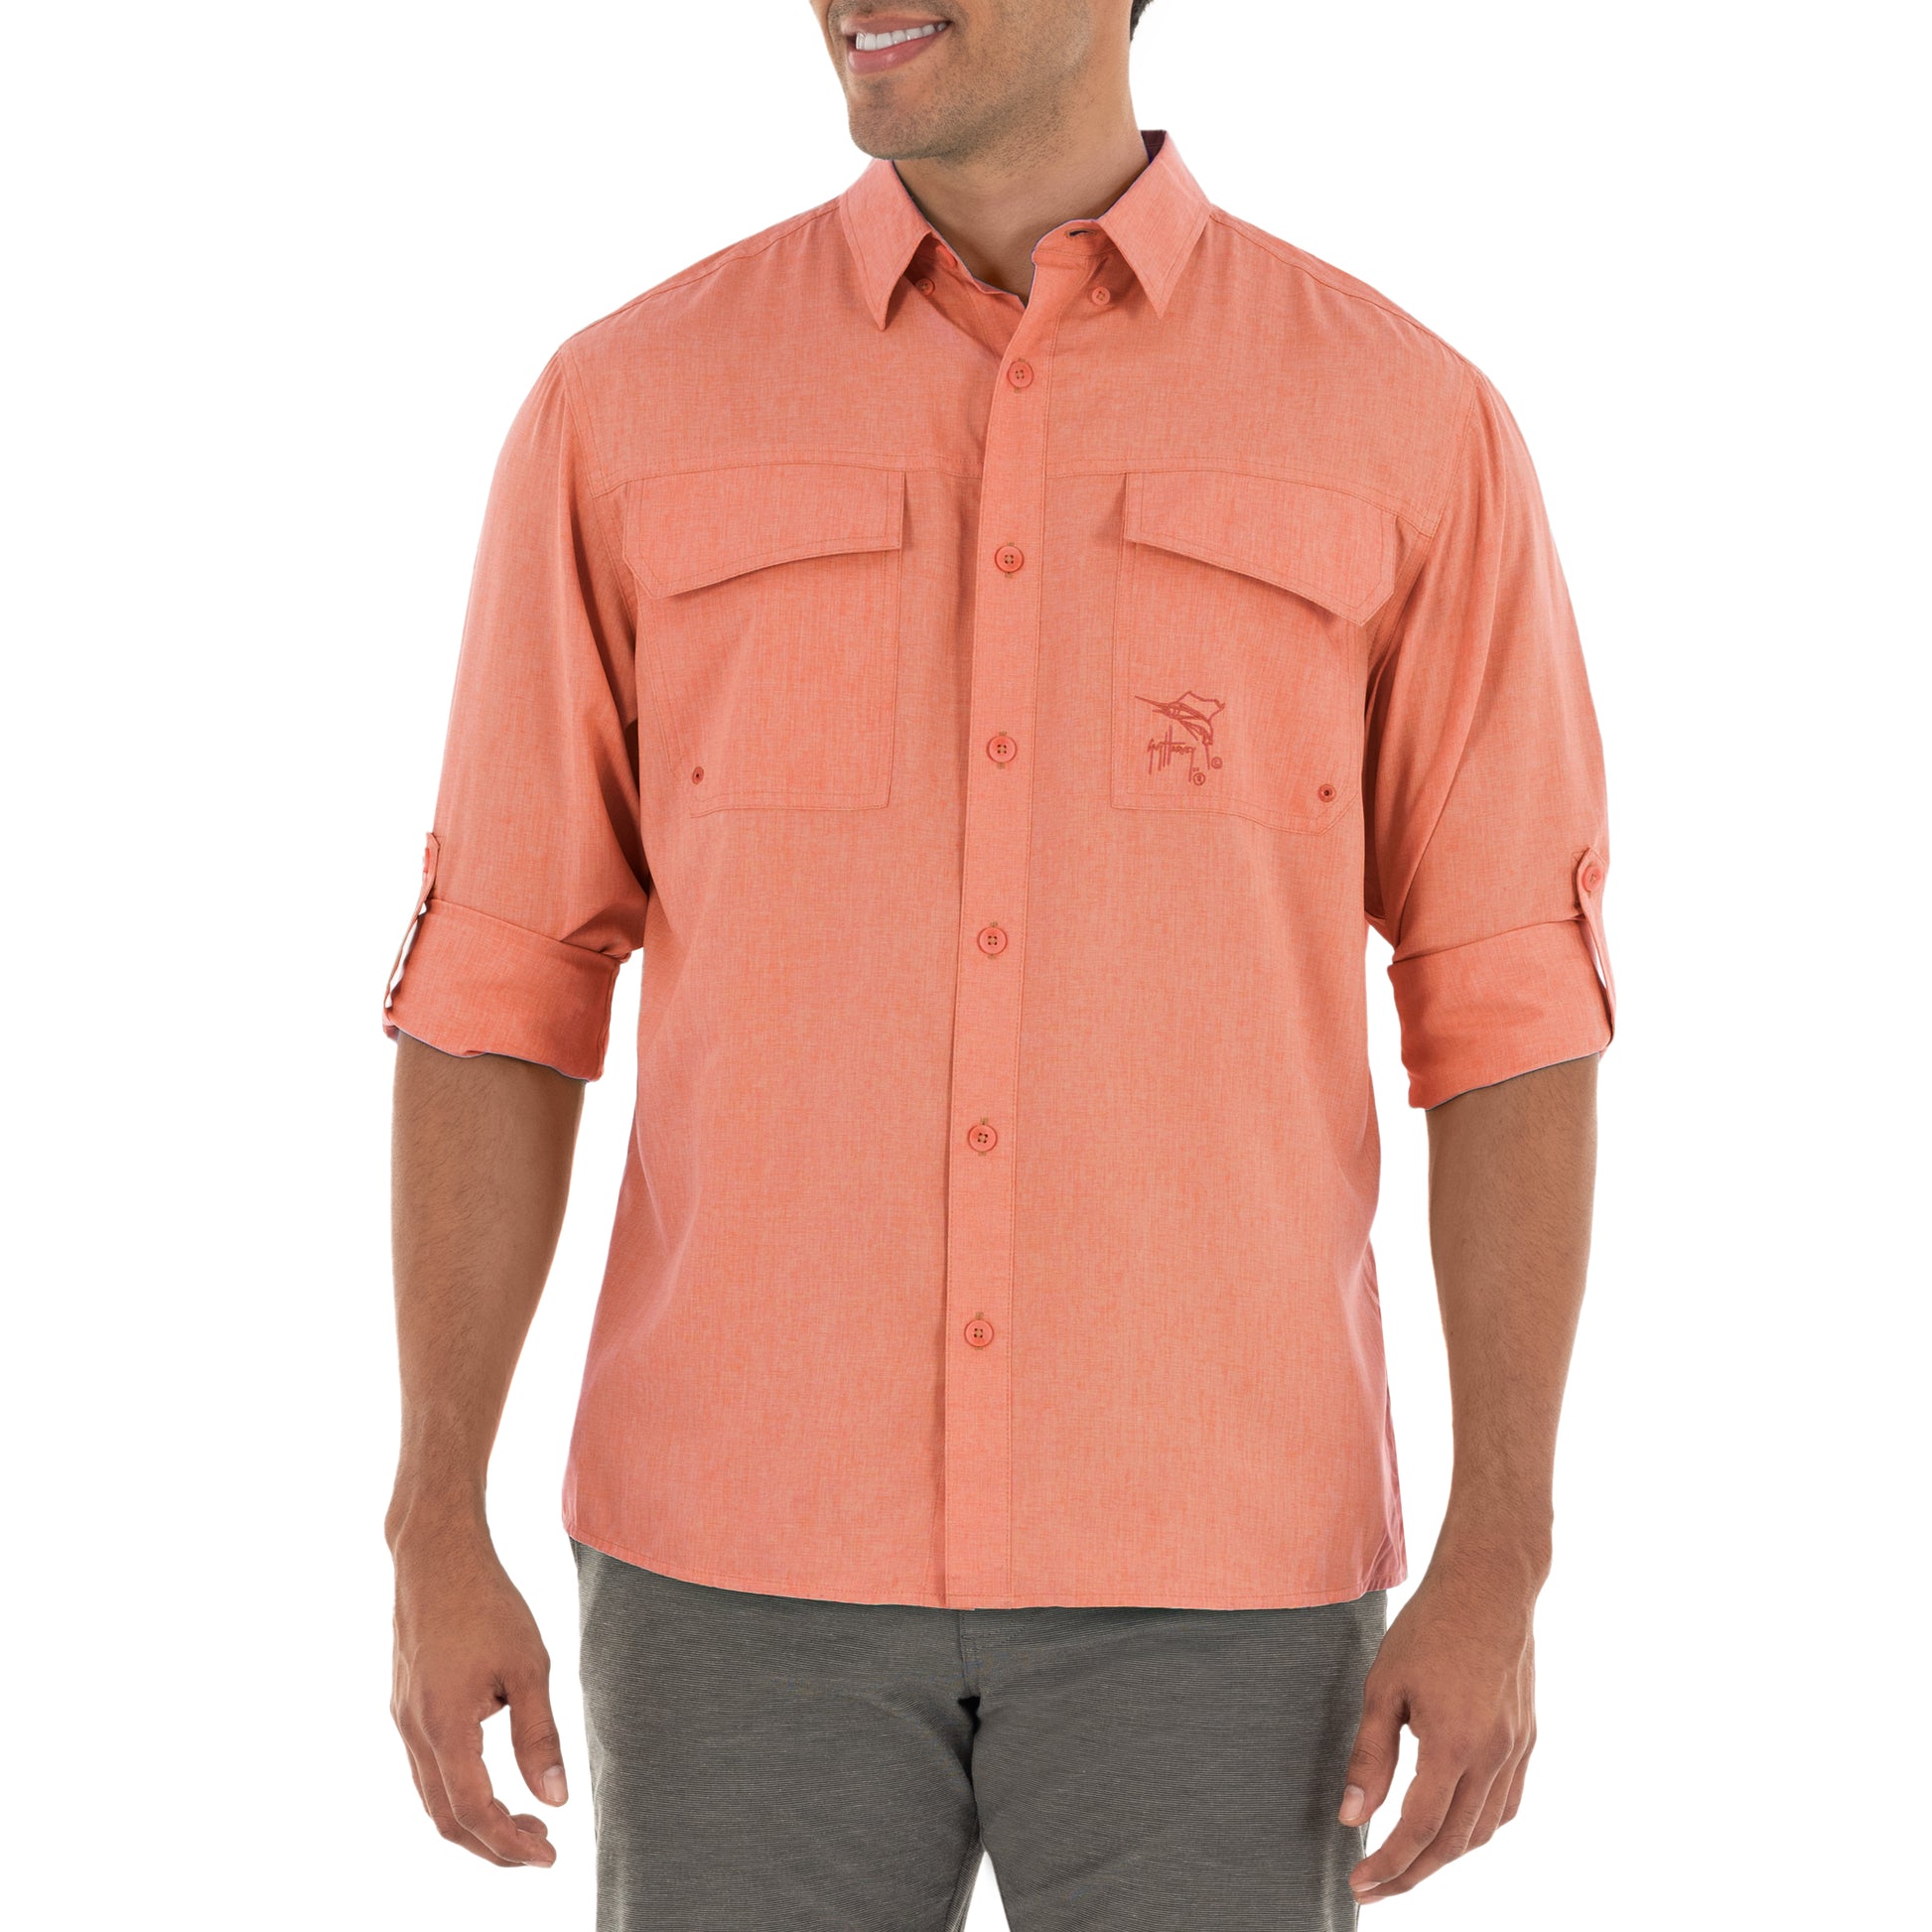 Men's Long Sleeve Heather Textured Cationic Coral Fishing Shirt View 3